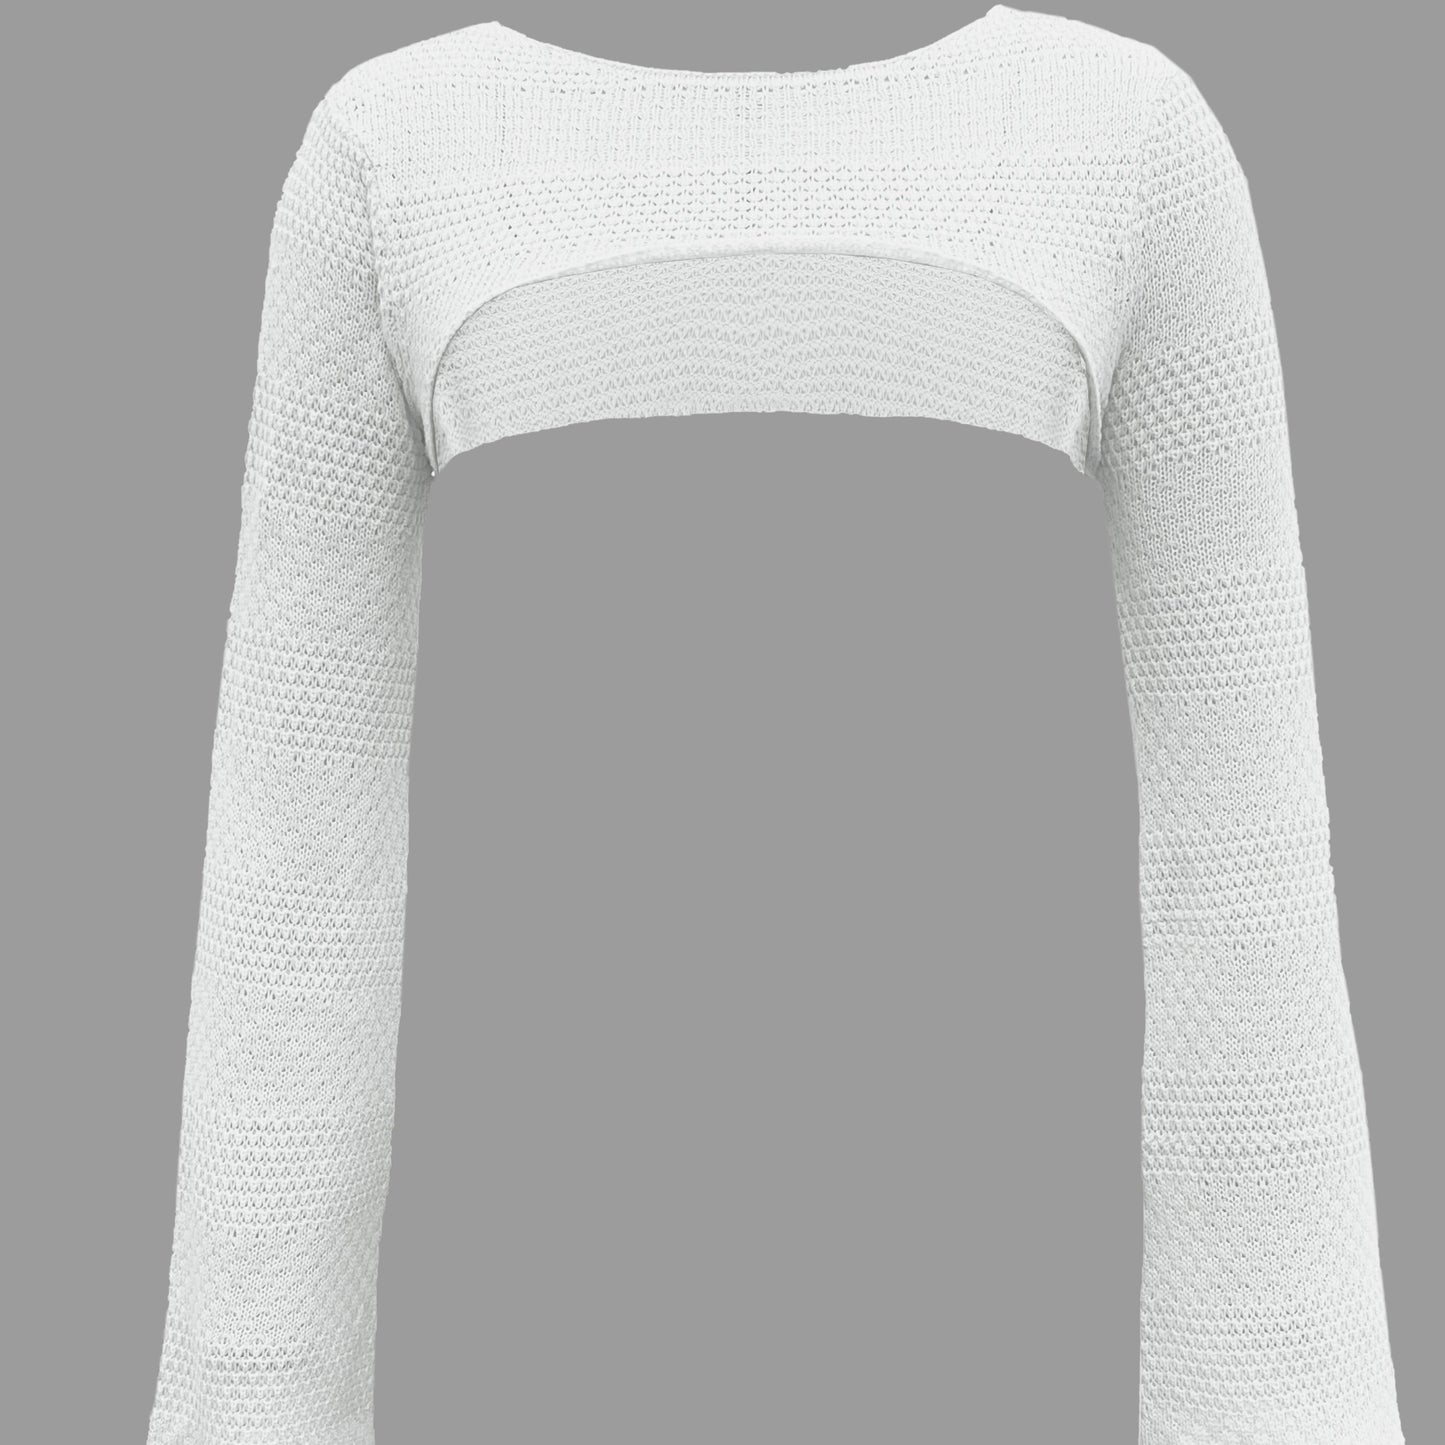 Antmvs Vacation Crop Knitted Sweater, Long Sleeve Casual Sweater For Spring & Summer, Women's Clothing